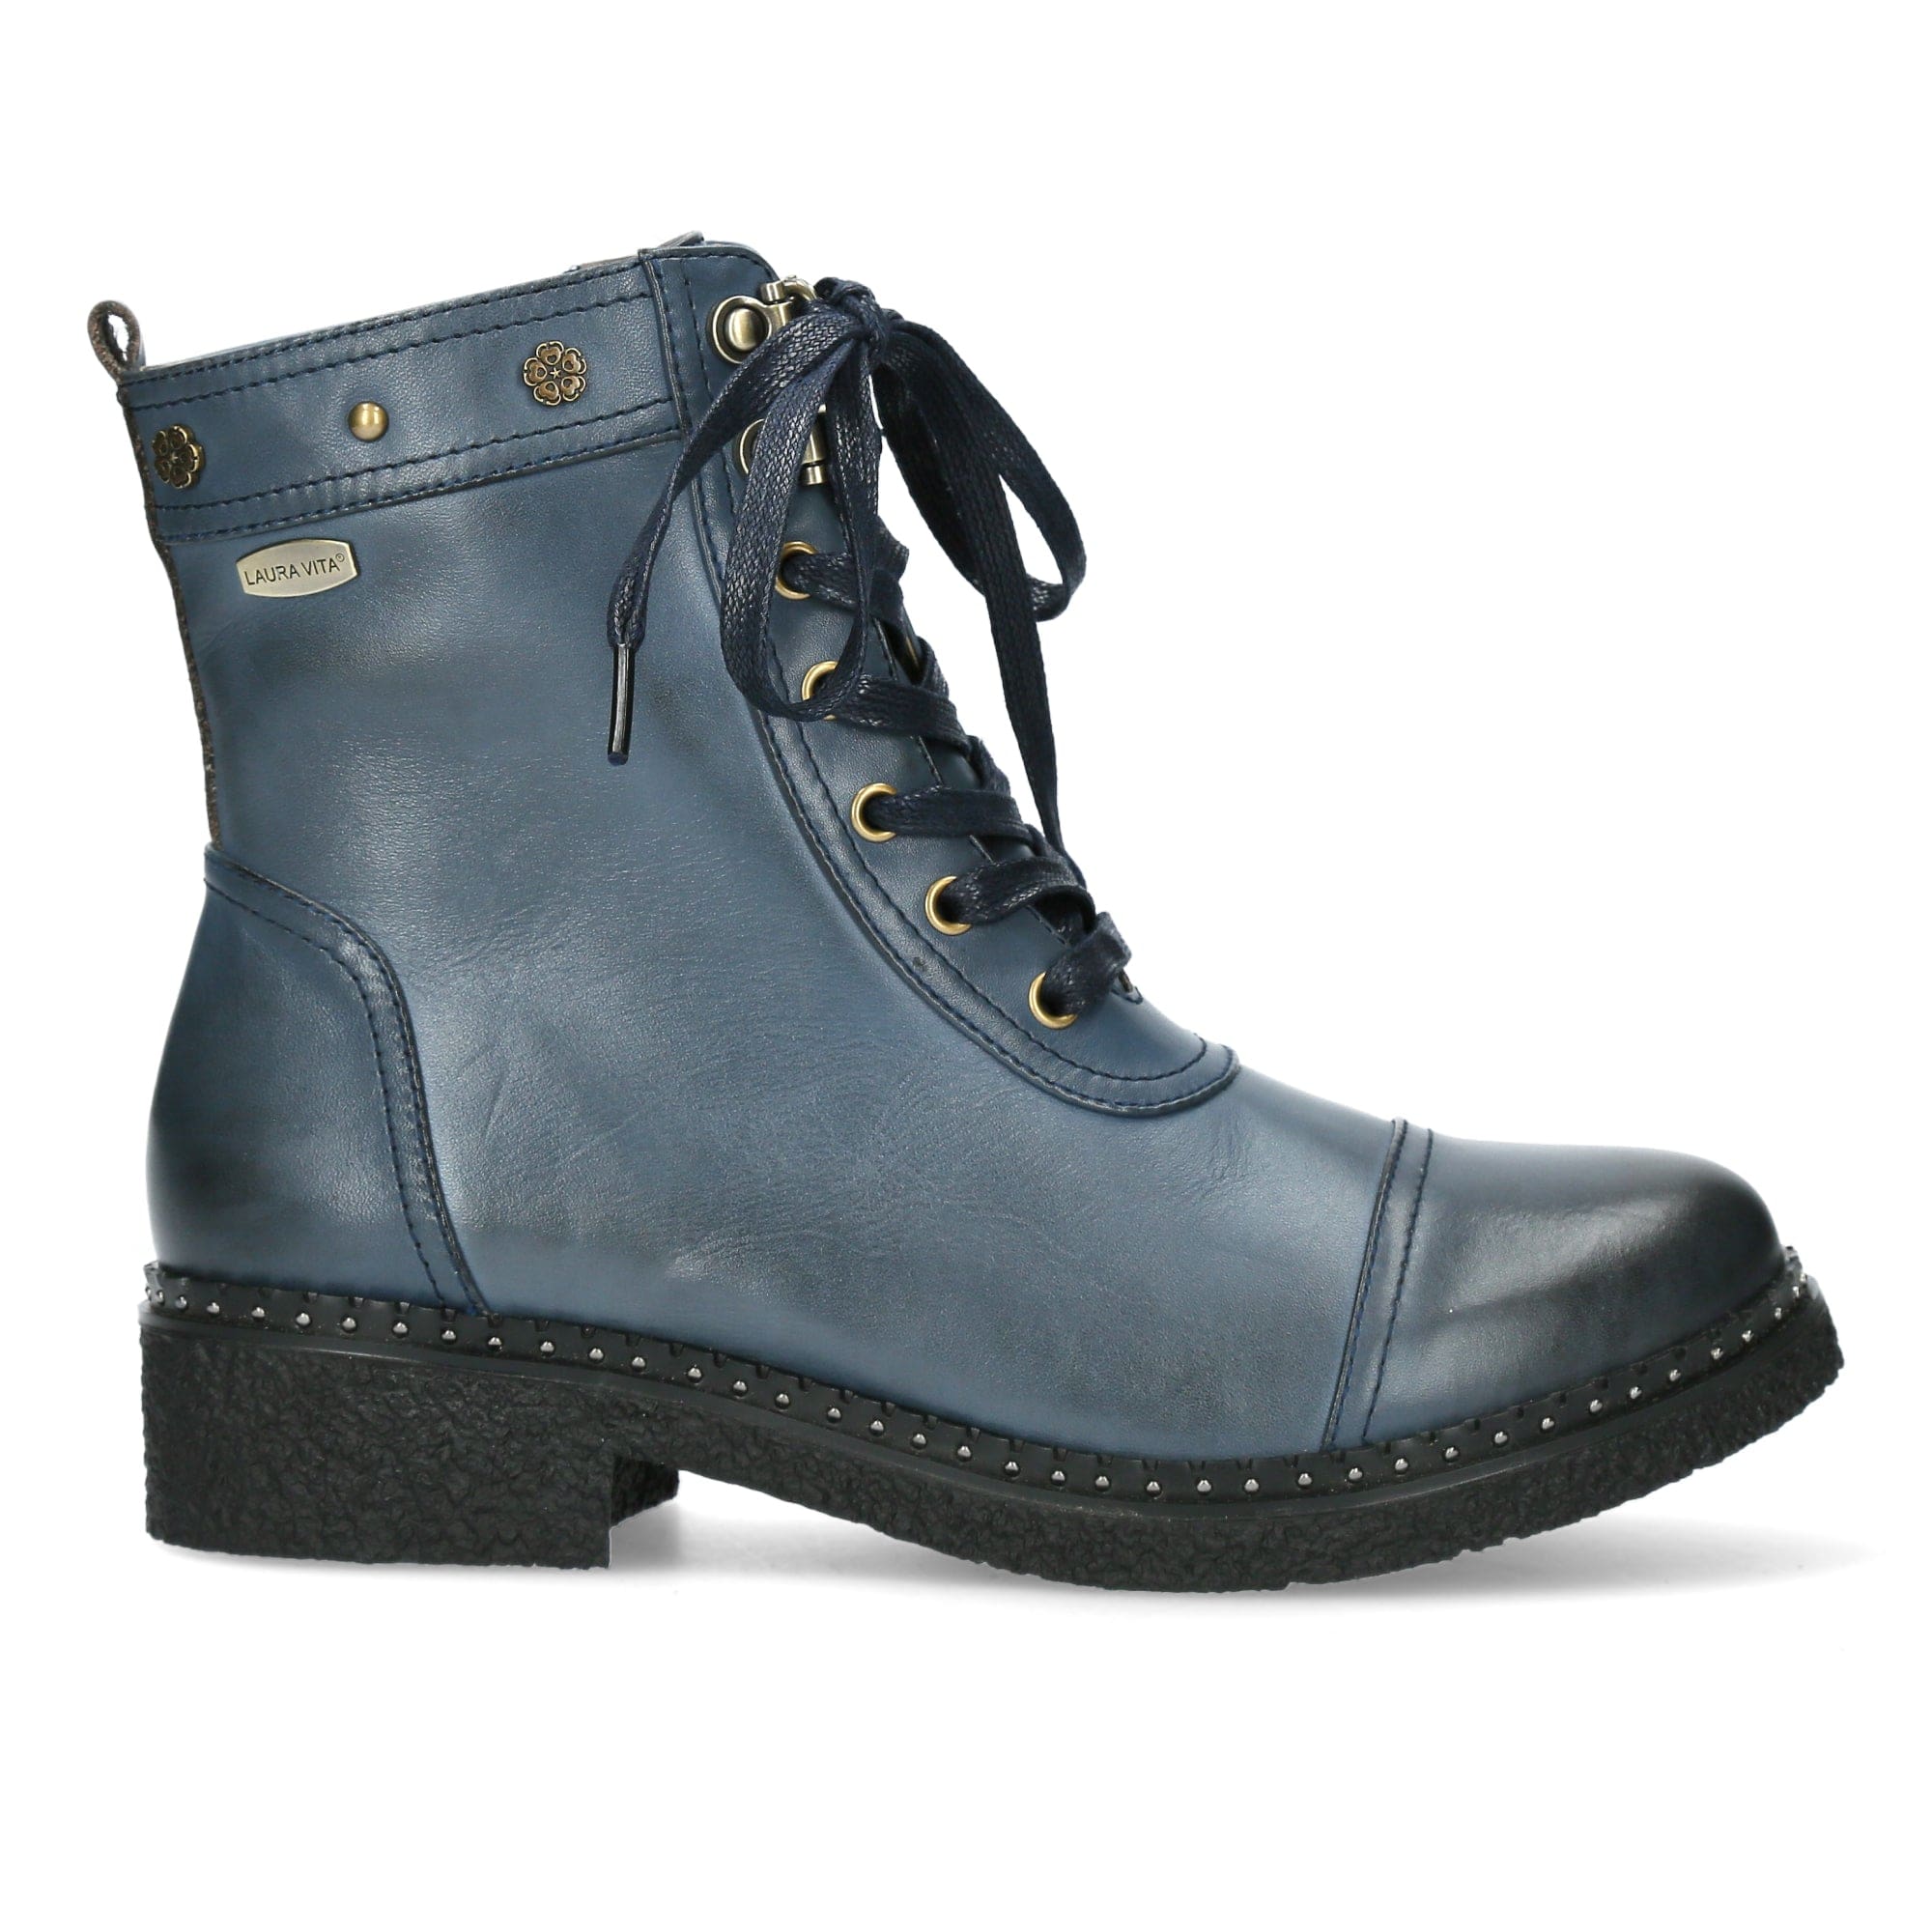 Chaussure IDCITEO 02 - 35 / Jeans - Boots